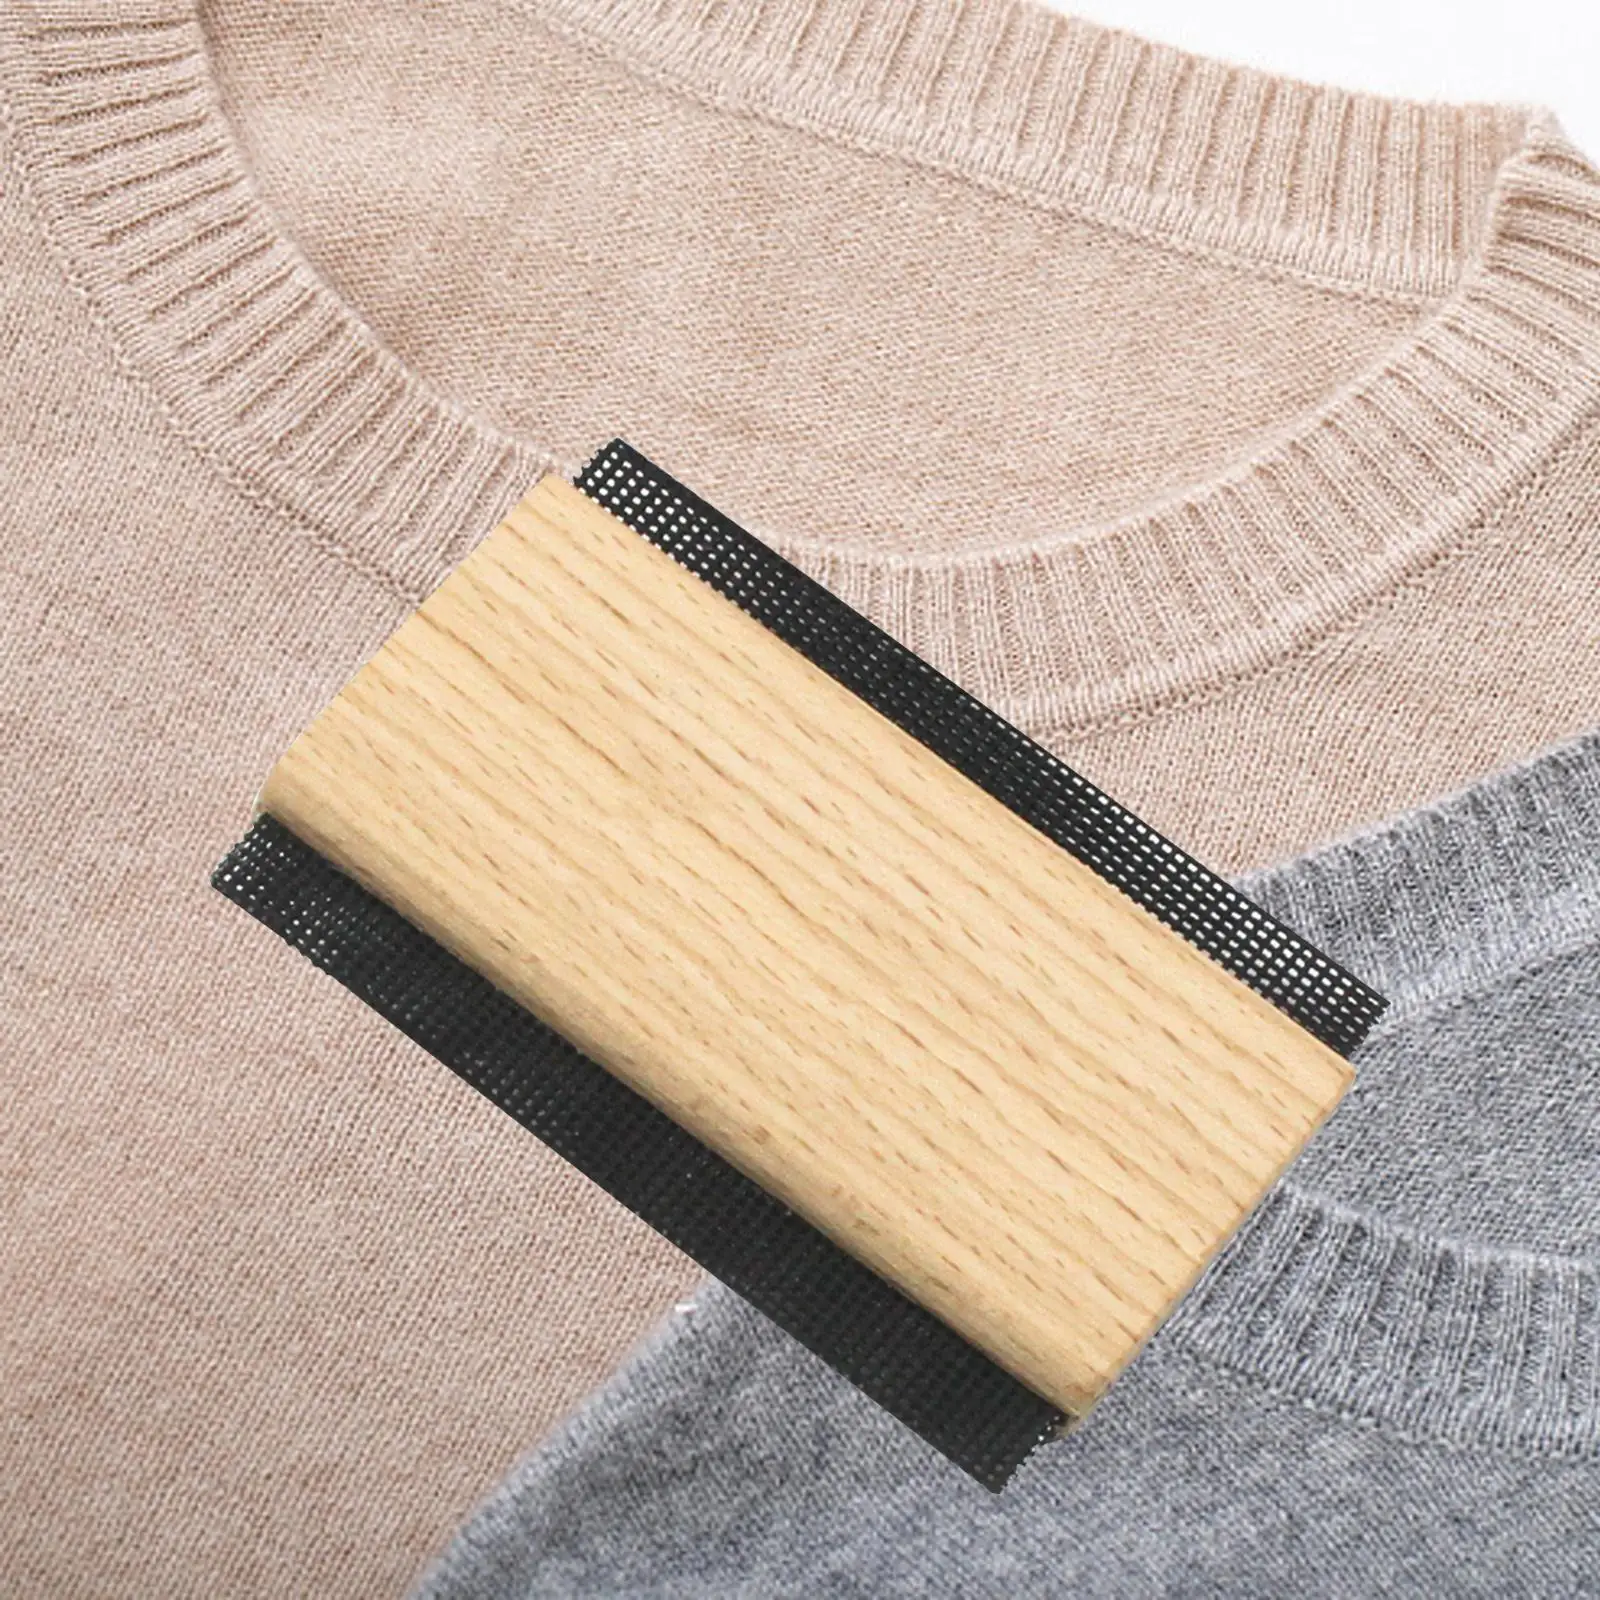 Travel Cashmere Comb Clothing Brush Tool to Remove Pilling Fuzz Manual Sweater Shaver for Removing Garments Office Clothing Home